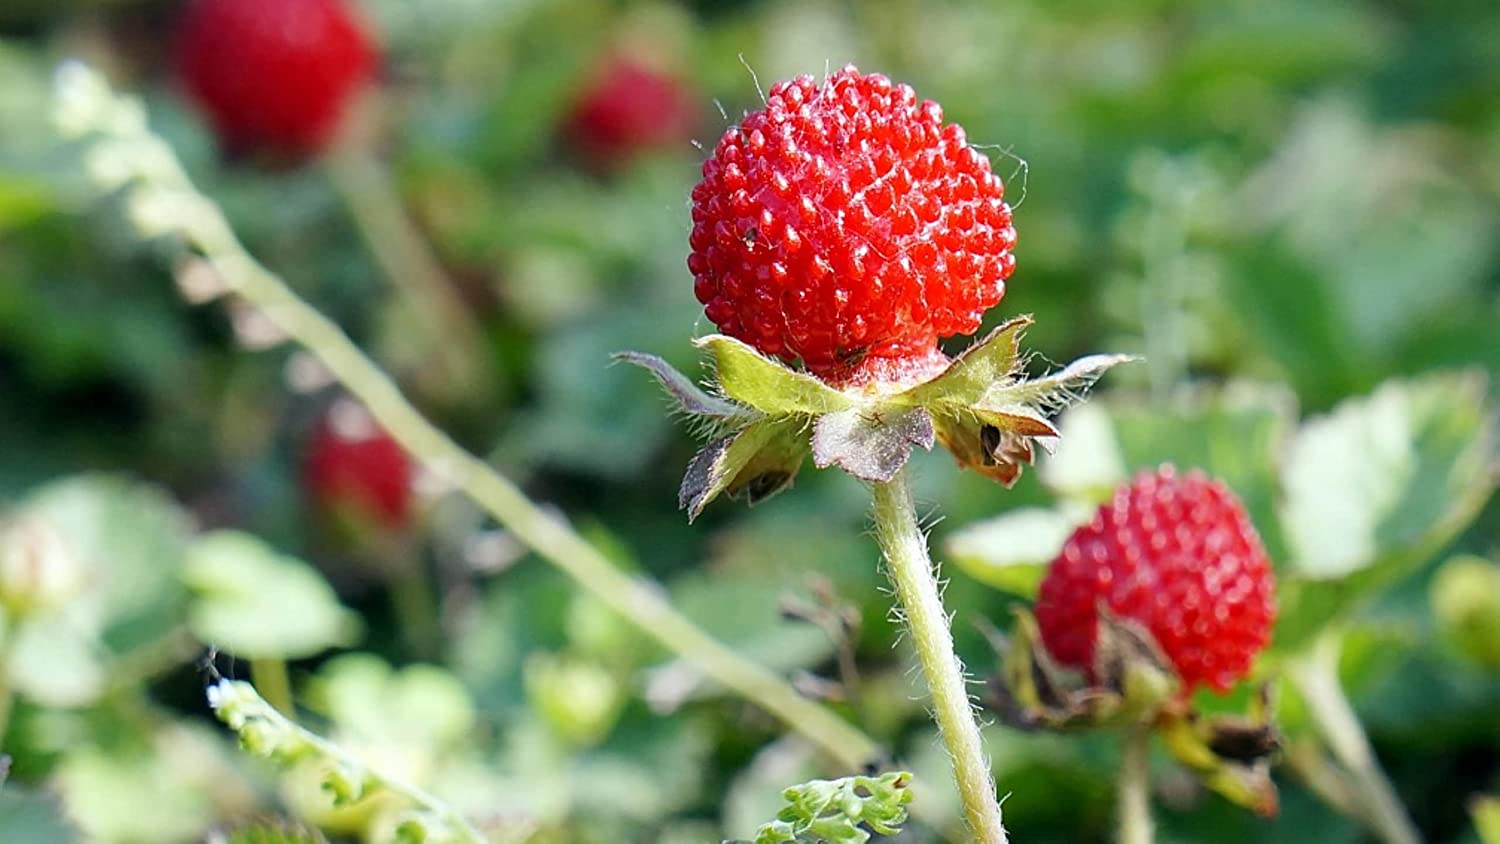 Mock Strawberry plant is often confused with wild strawberry. They have similar leaves and fruits, but mock strawberry produces yellow flowers while wild strawberries have white flowers.